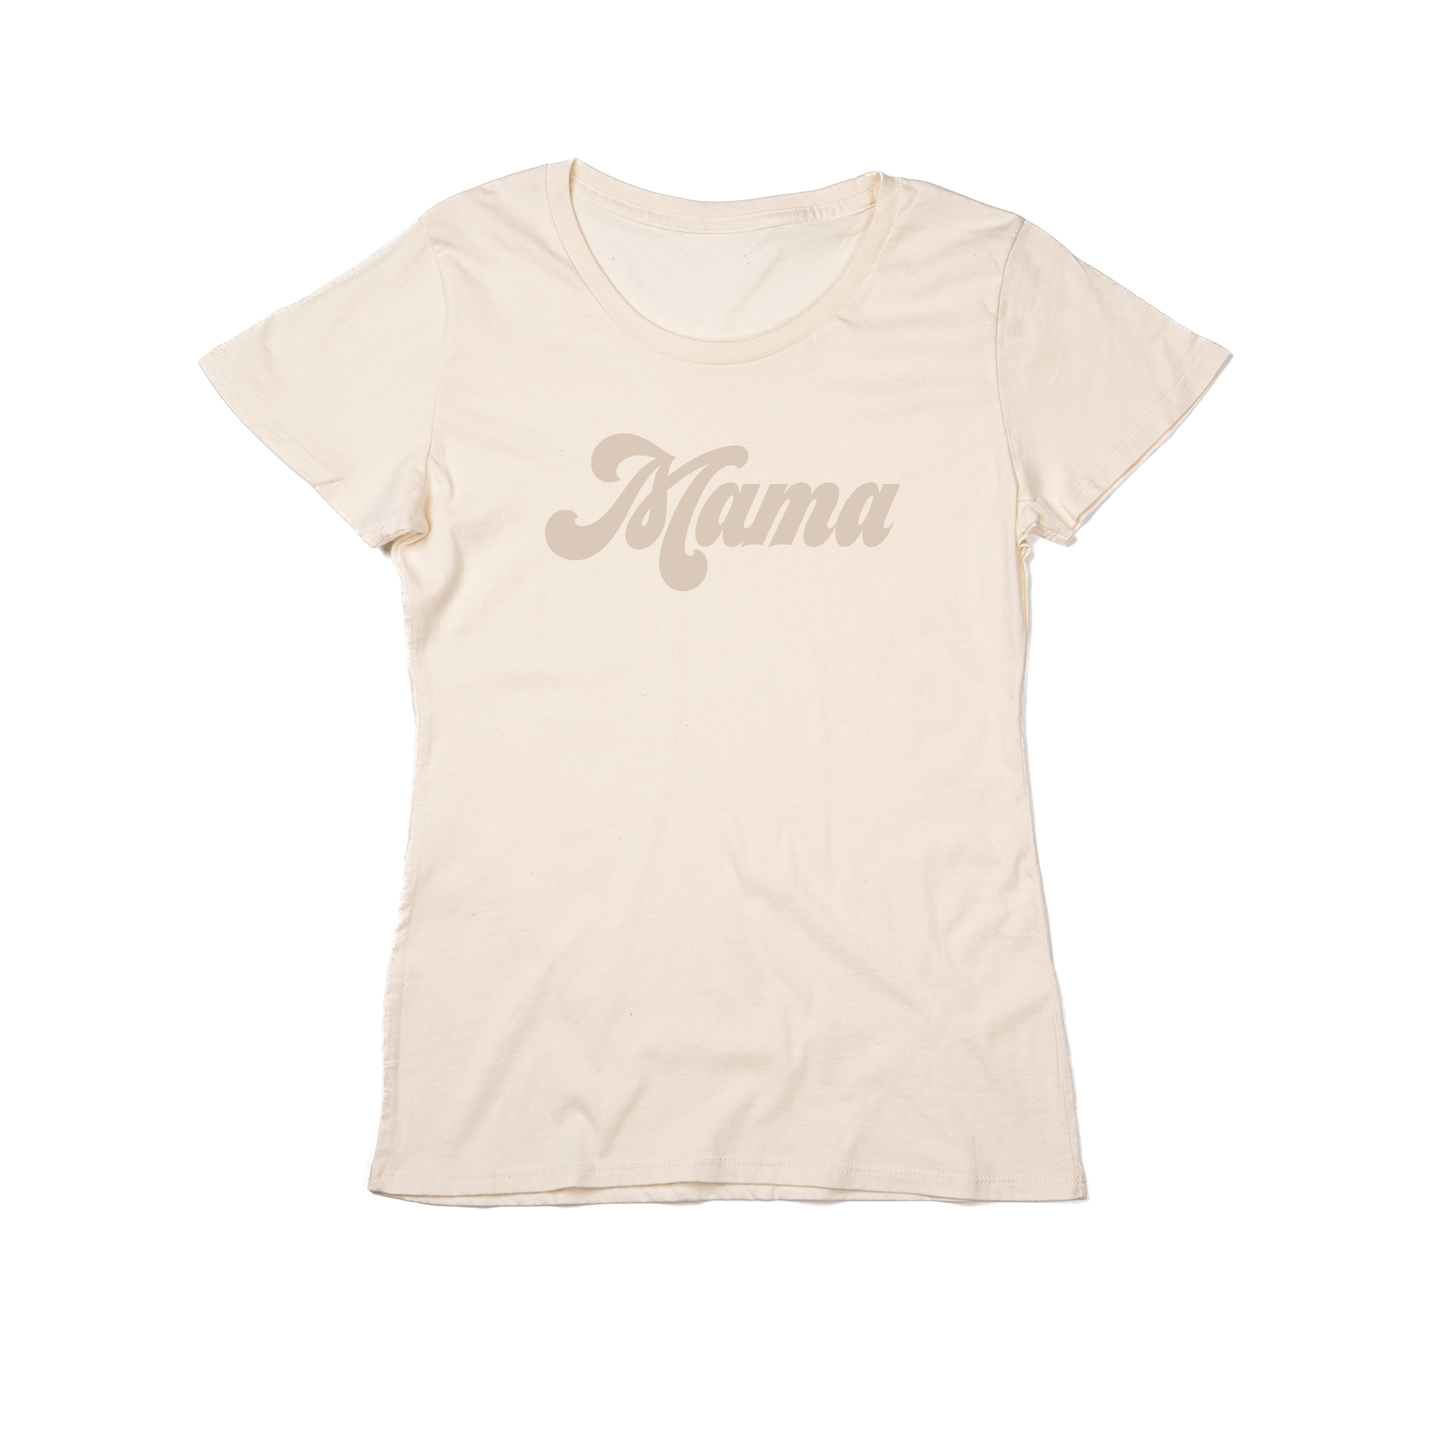 Mama (Retro, Stone) - Women's Fitted Tee (Natural)